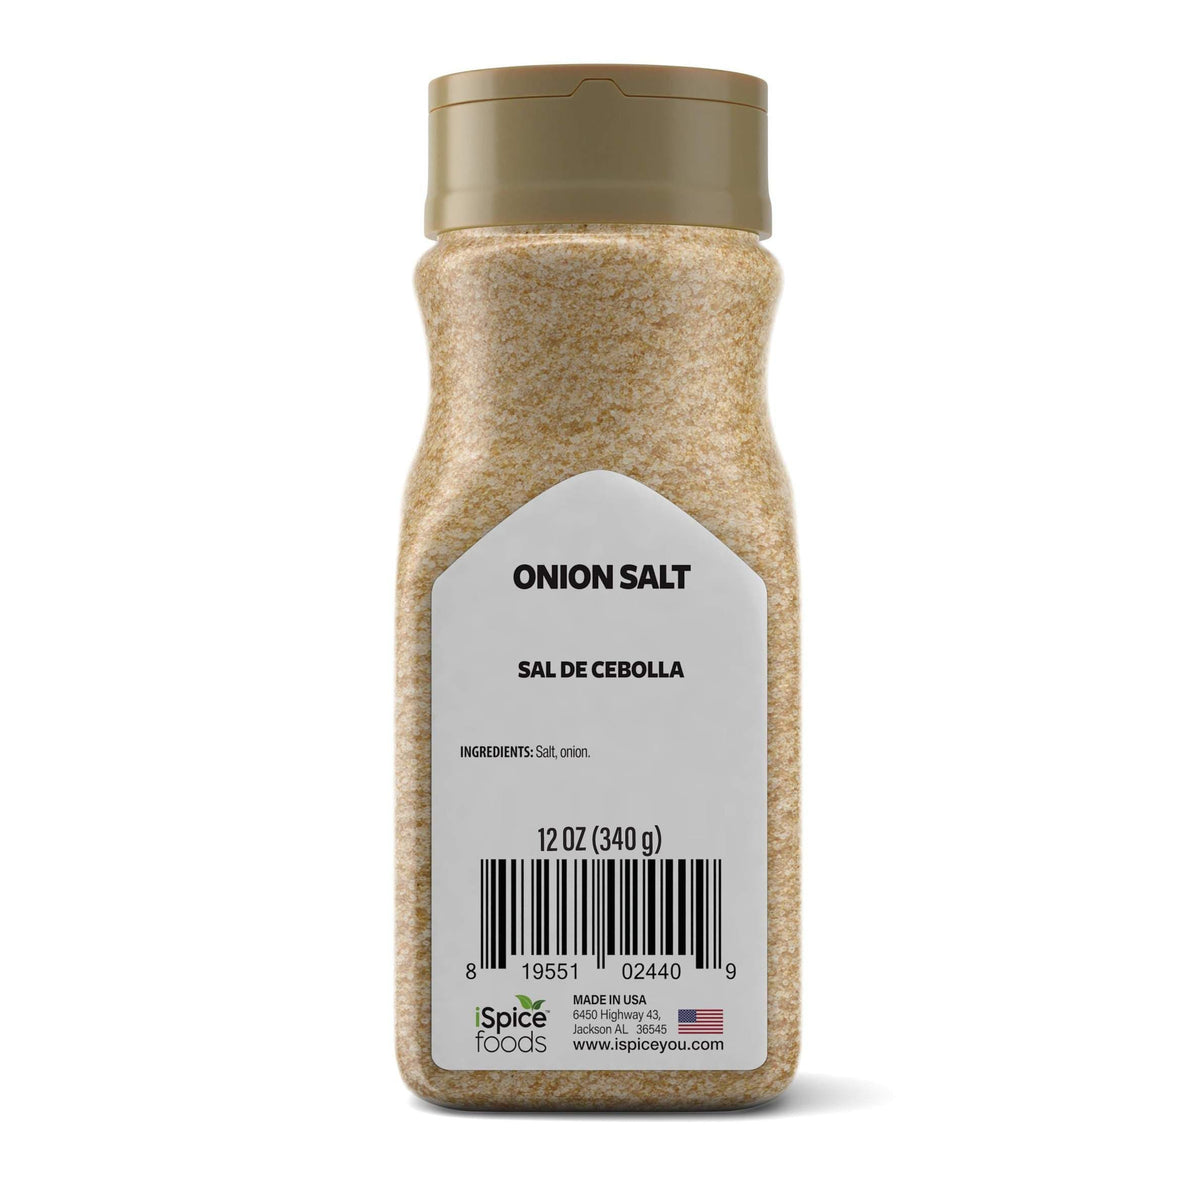 Grocery Shopping Guide: Onion Salt 101